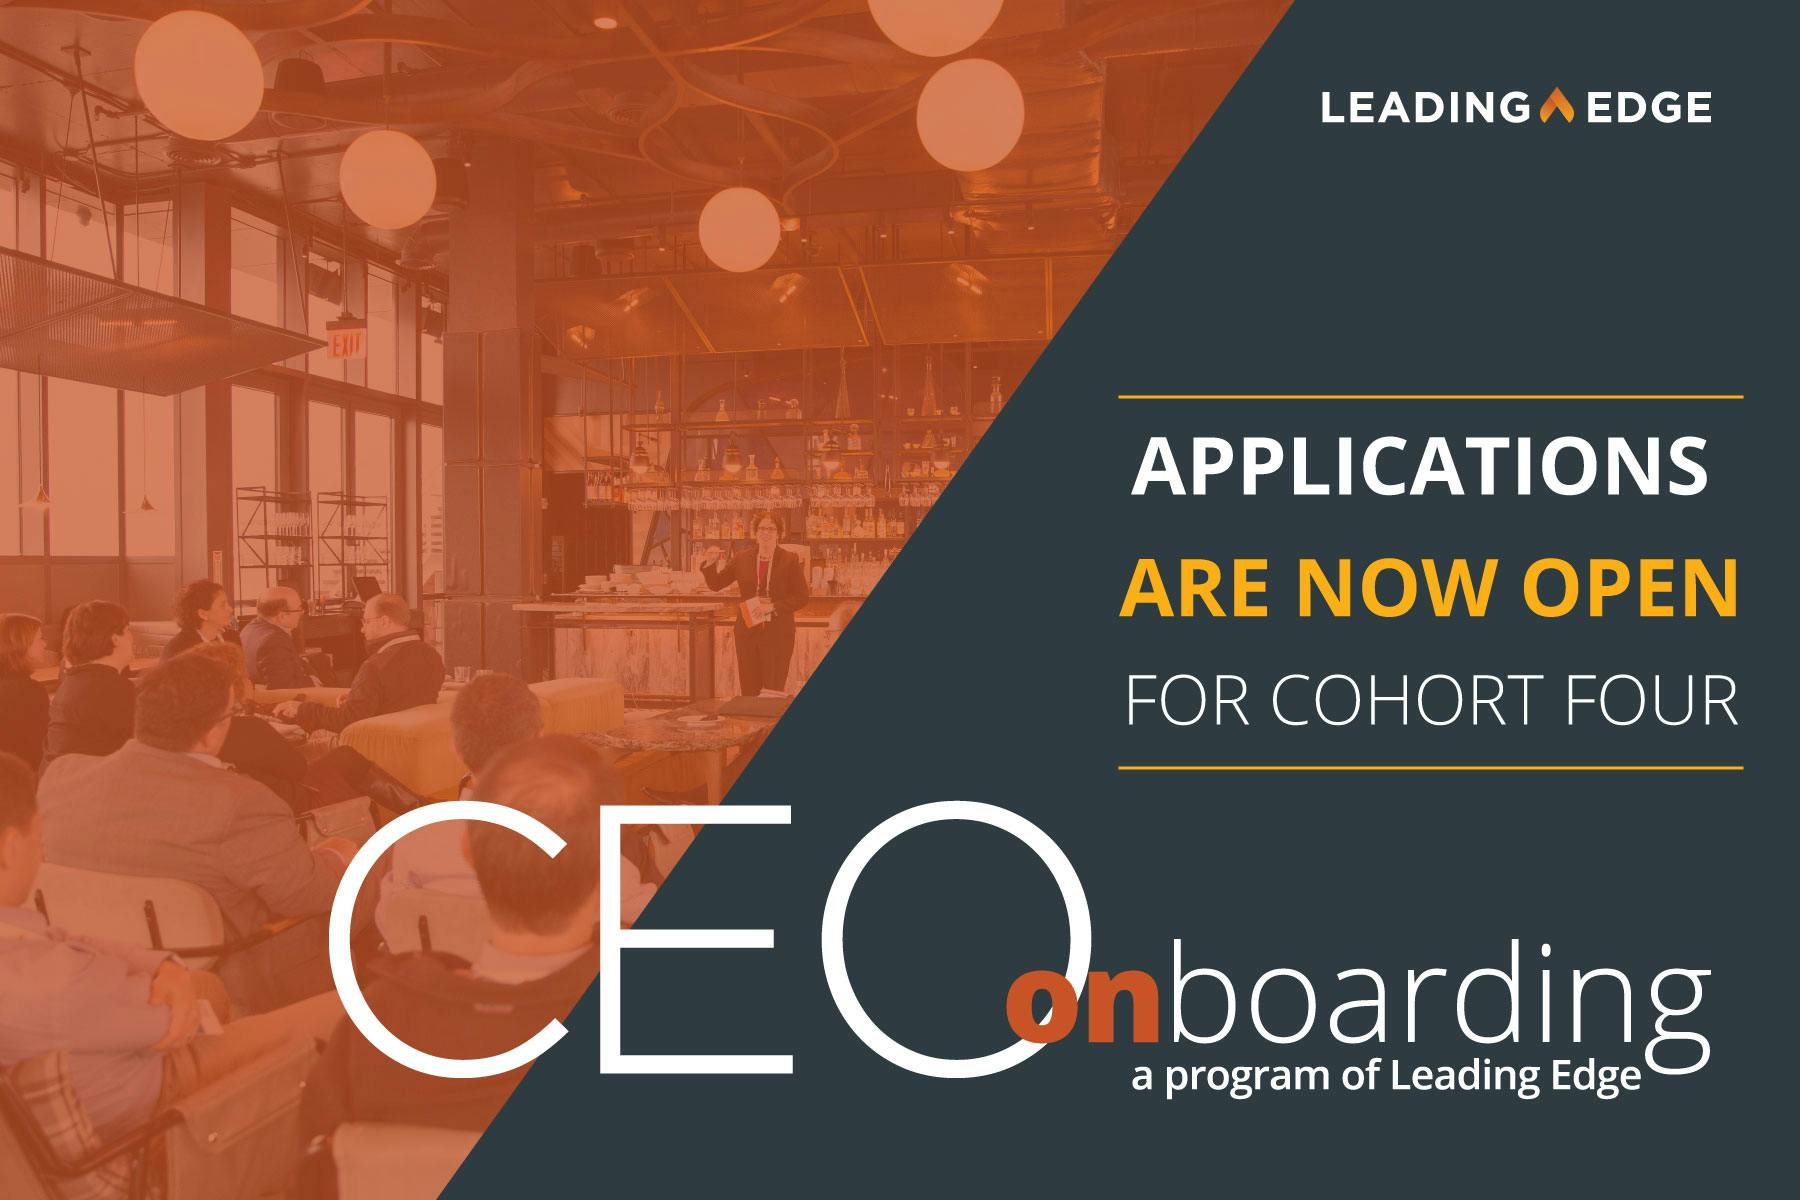 CEO Onboarding Applications are Now Open for Cohort Four